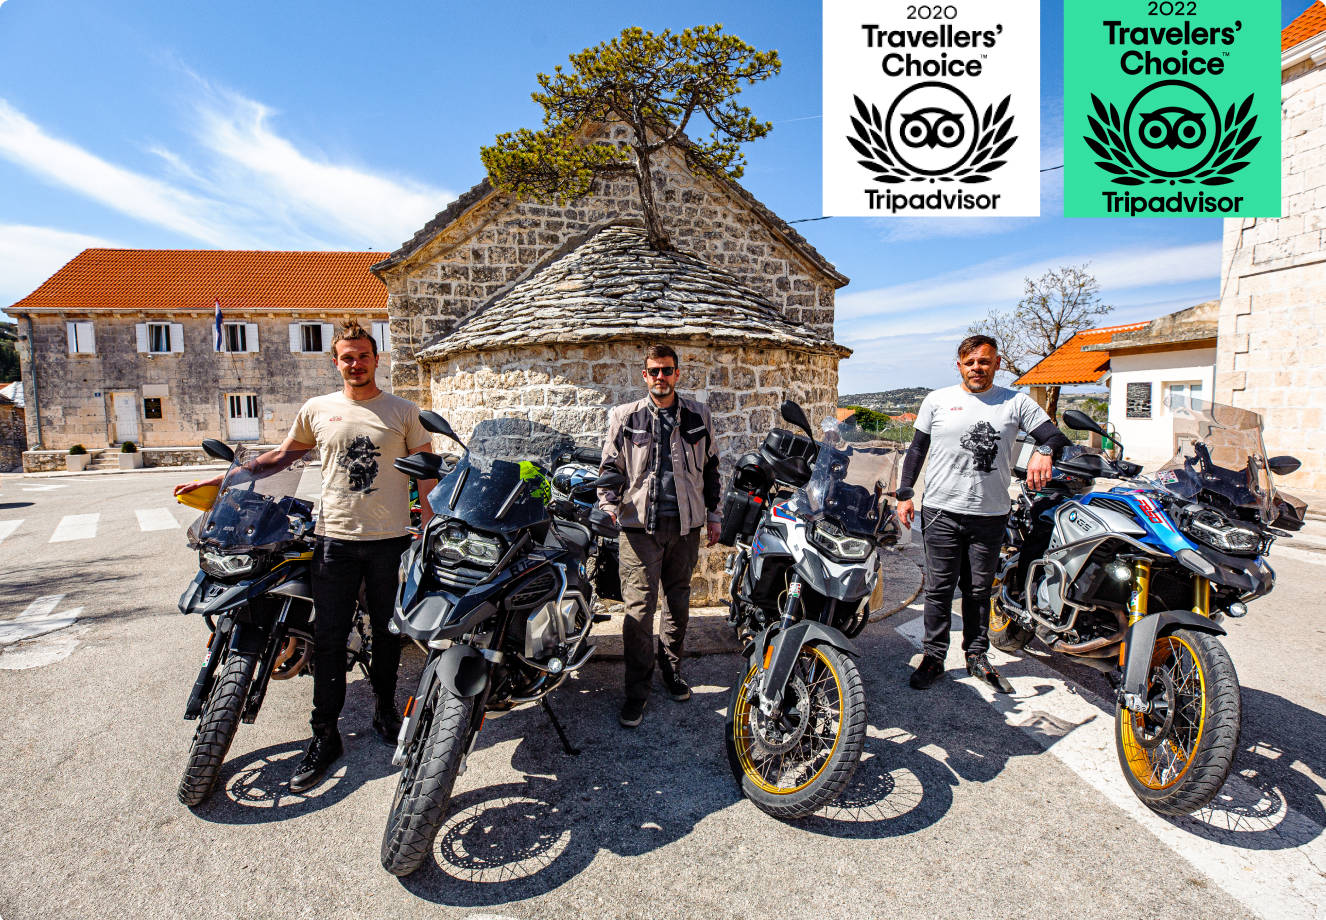 TOP 5 motorcycle routes for discover untouched Croatia & Balkan​